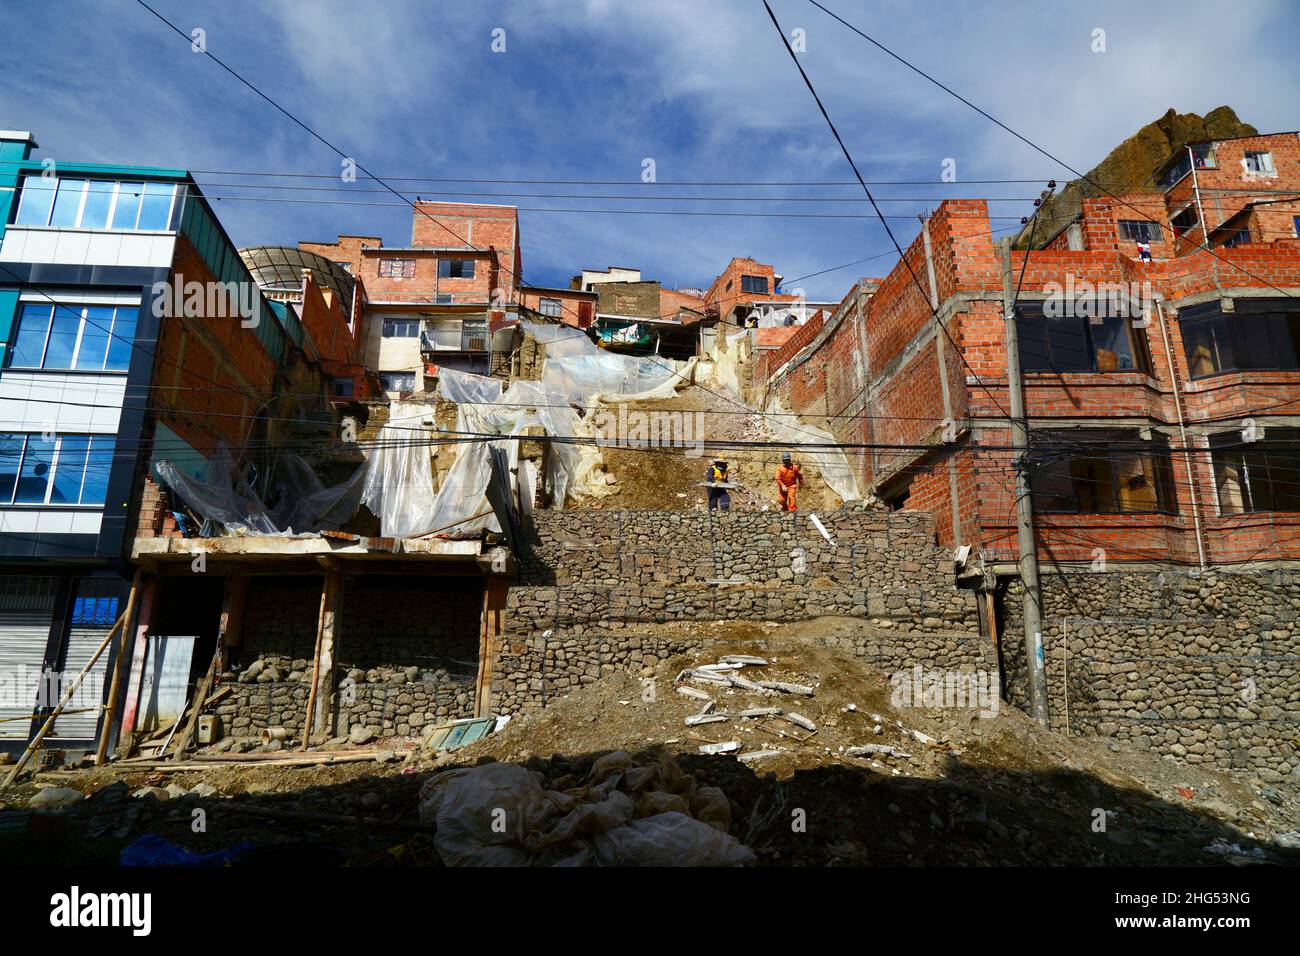 La Paz, Bolivia: Municipal workers stabilising a hillside and damaged houses with cages filled with rocks / gabions at a site in Tembladerani / Cotahuma district. Unauthorised excavation and earth moving by one of the property owners caused part of the hillside to collapse. Many of La Paz's hillside neighbourhoods have been built in unstable areas without proper permits or building controls. Subsidence and erosion causing landslides and houses to collapse are common, especially in the rainy season. In this incident 2 houses had to be demolished and 6 others were badly affected. Stock Photo